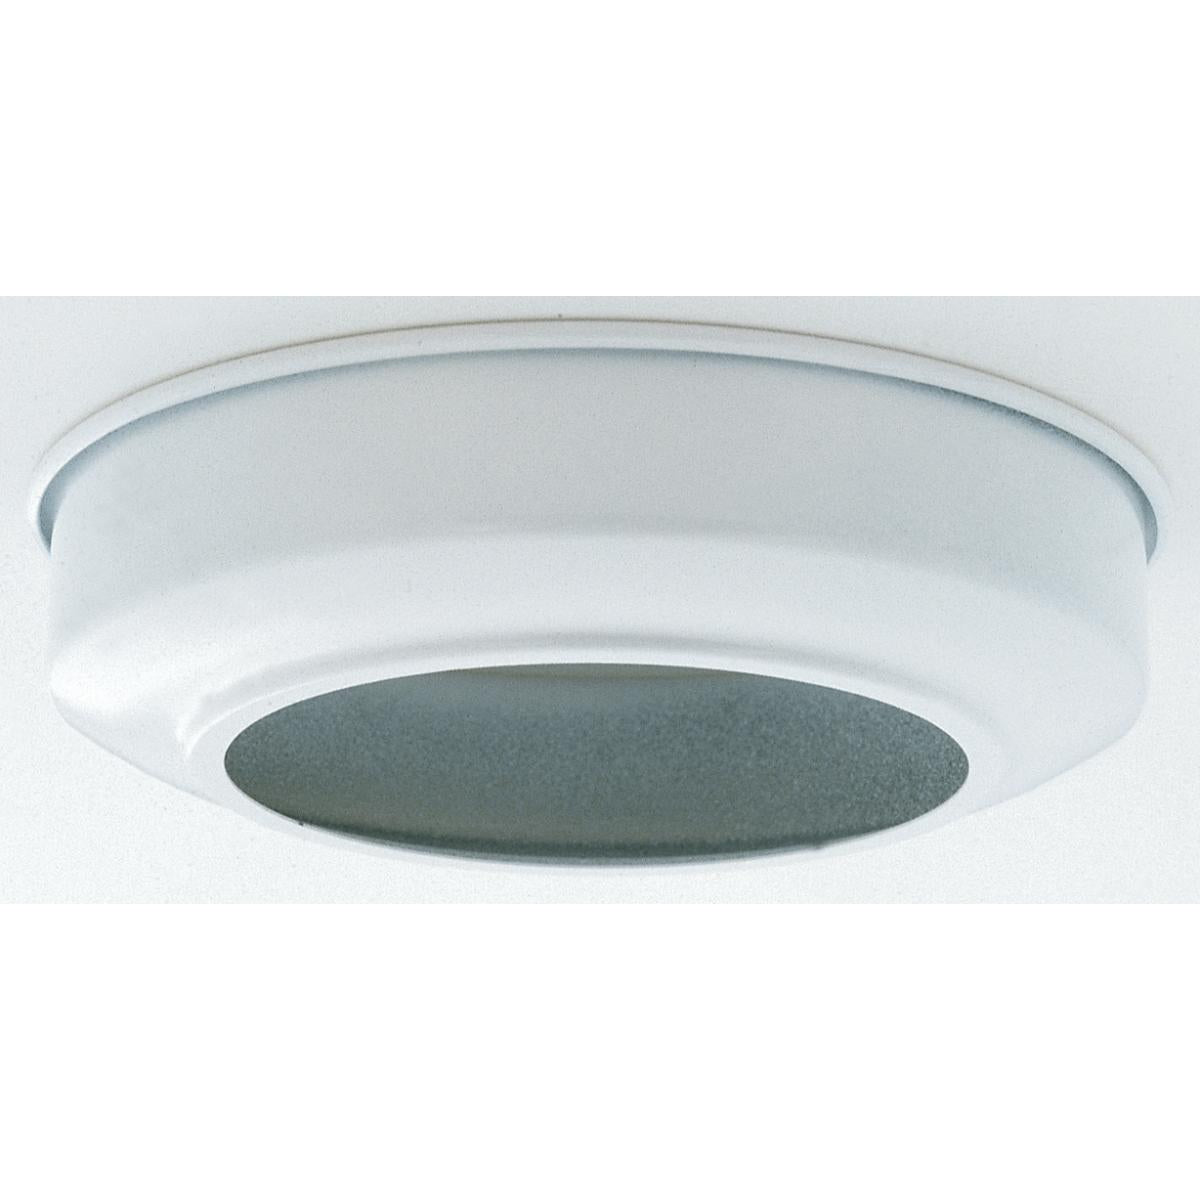 Satco 90-108 Canopy Extension White Finish 5-3/4" Diameter Fits 5" Canopy 1-1/2" Extension